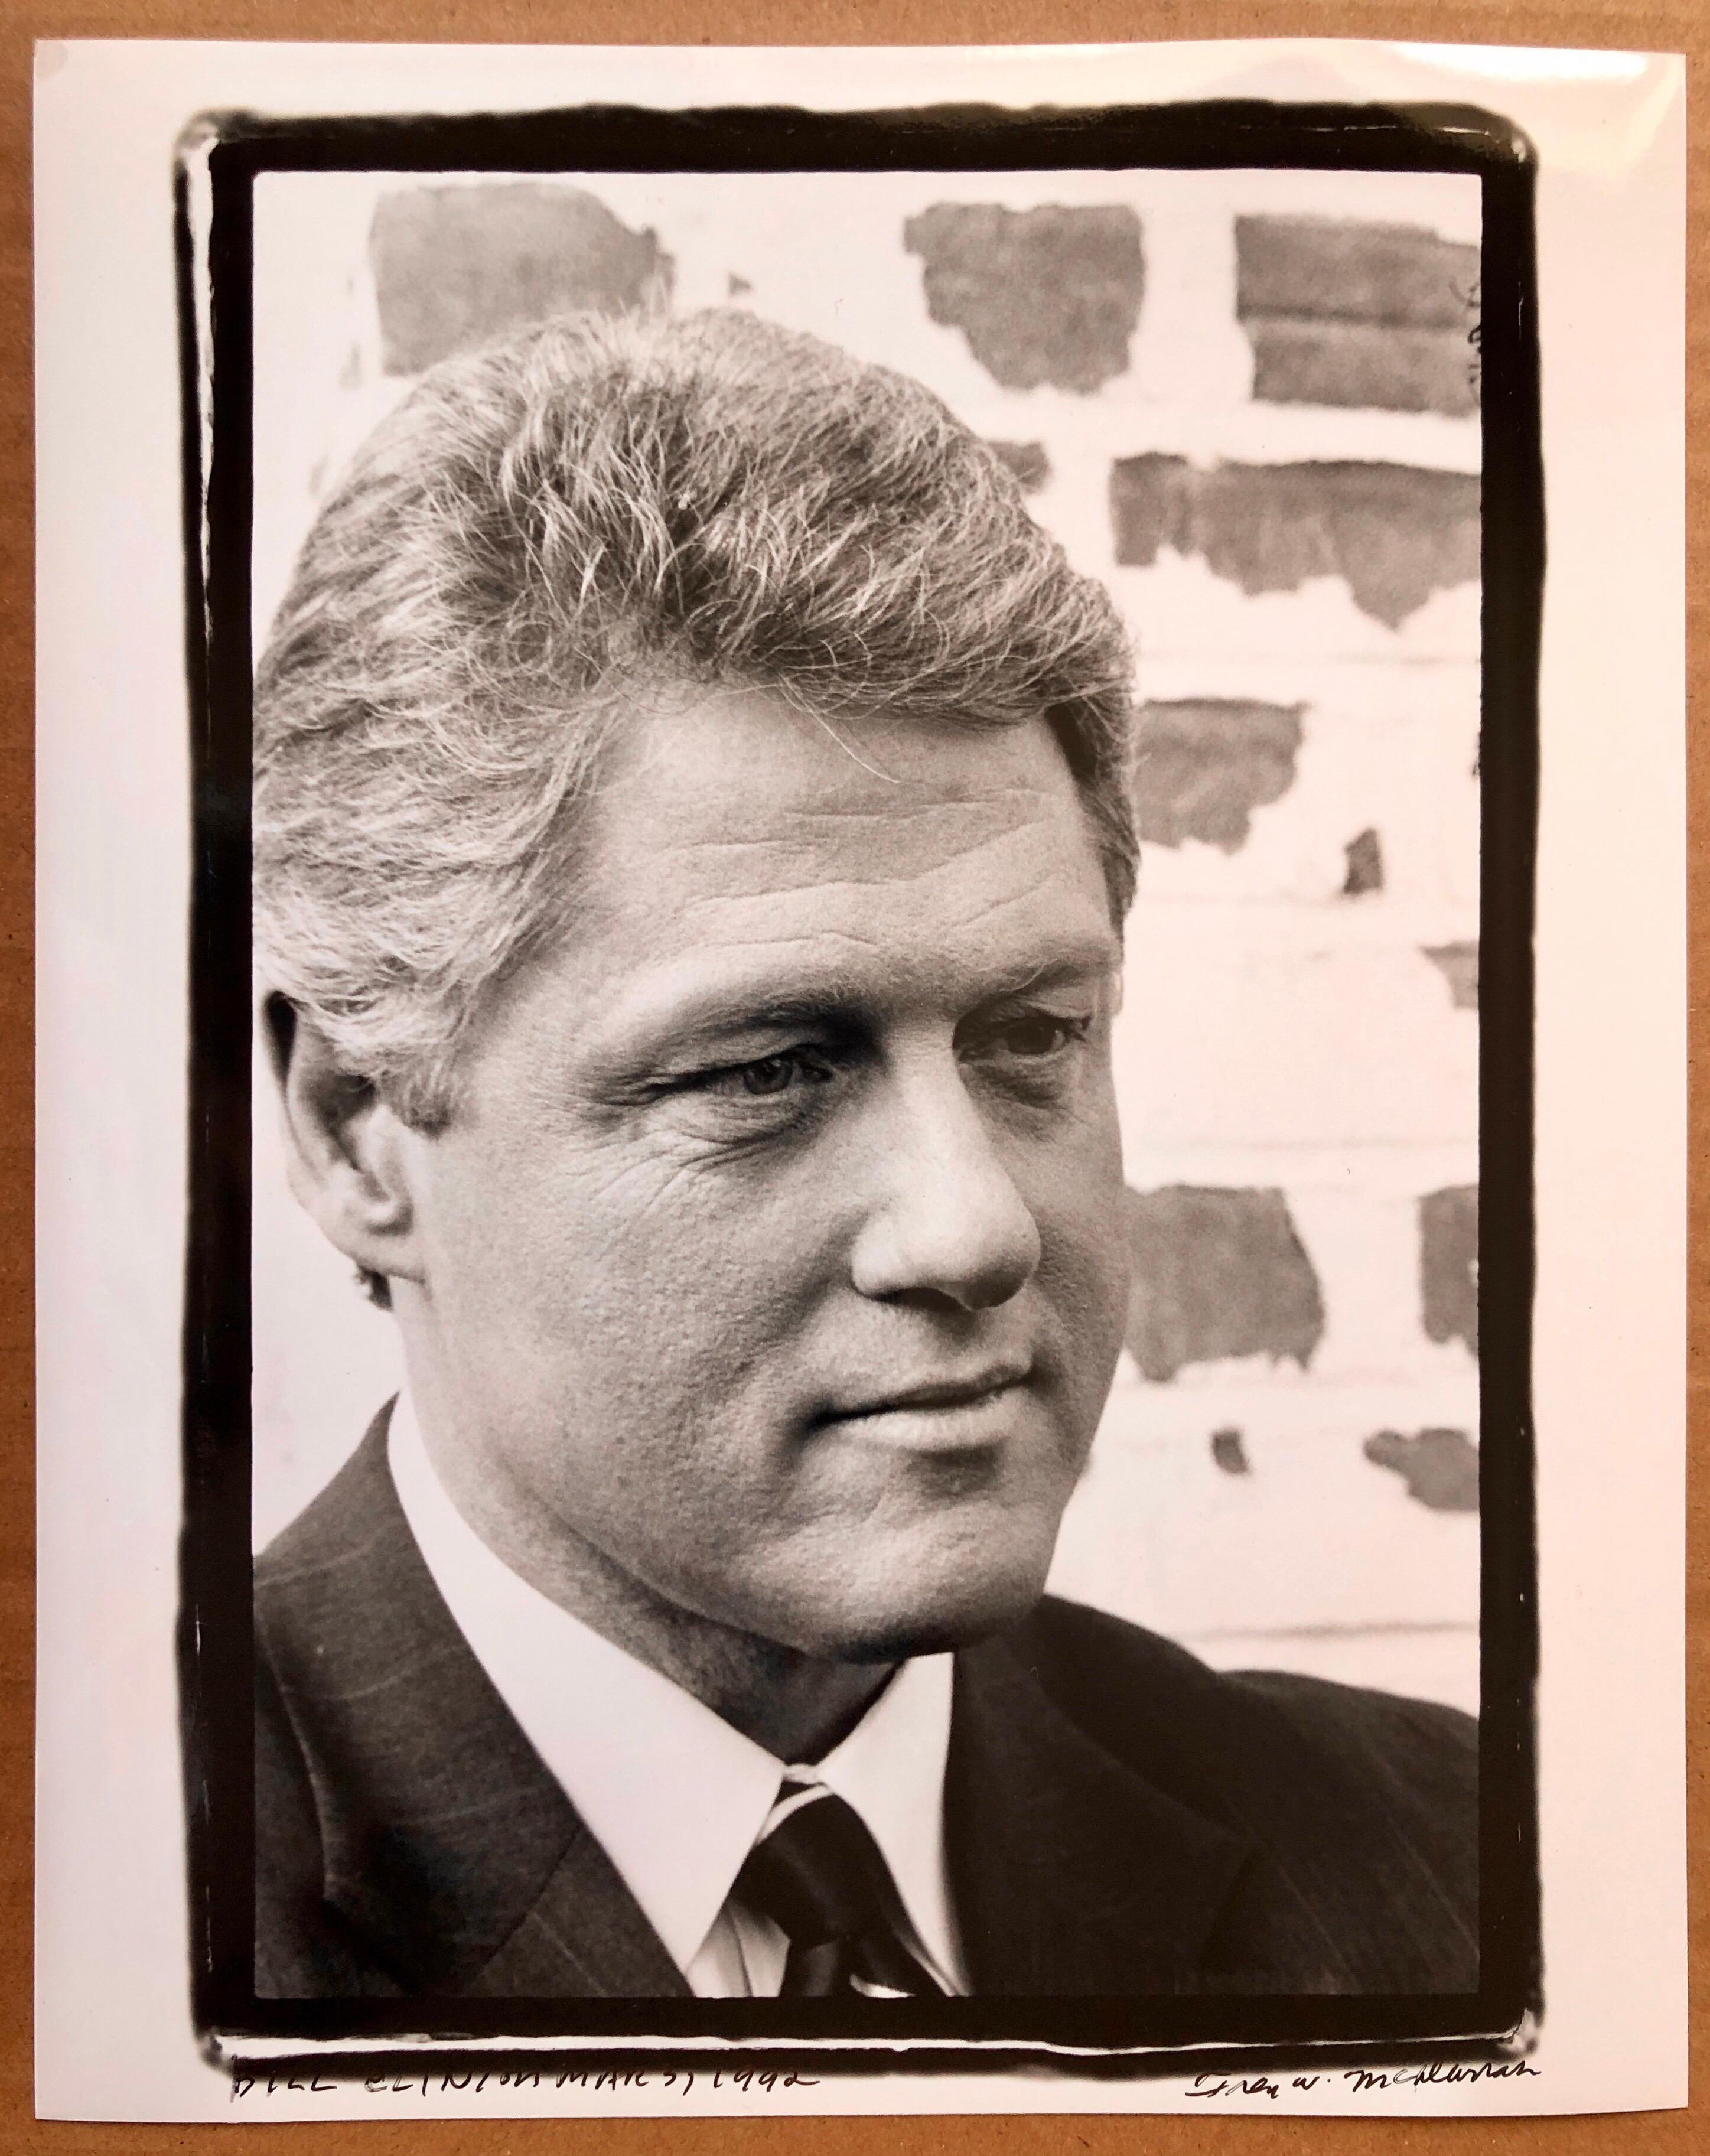 signed in ink and with photographer stamp verso and hand written title.

William Jefferson Clinton (born William Jefferson Blythe III; August 19, 1946) is an American politician who served as the 42nd President of the United States from January 20,